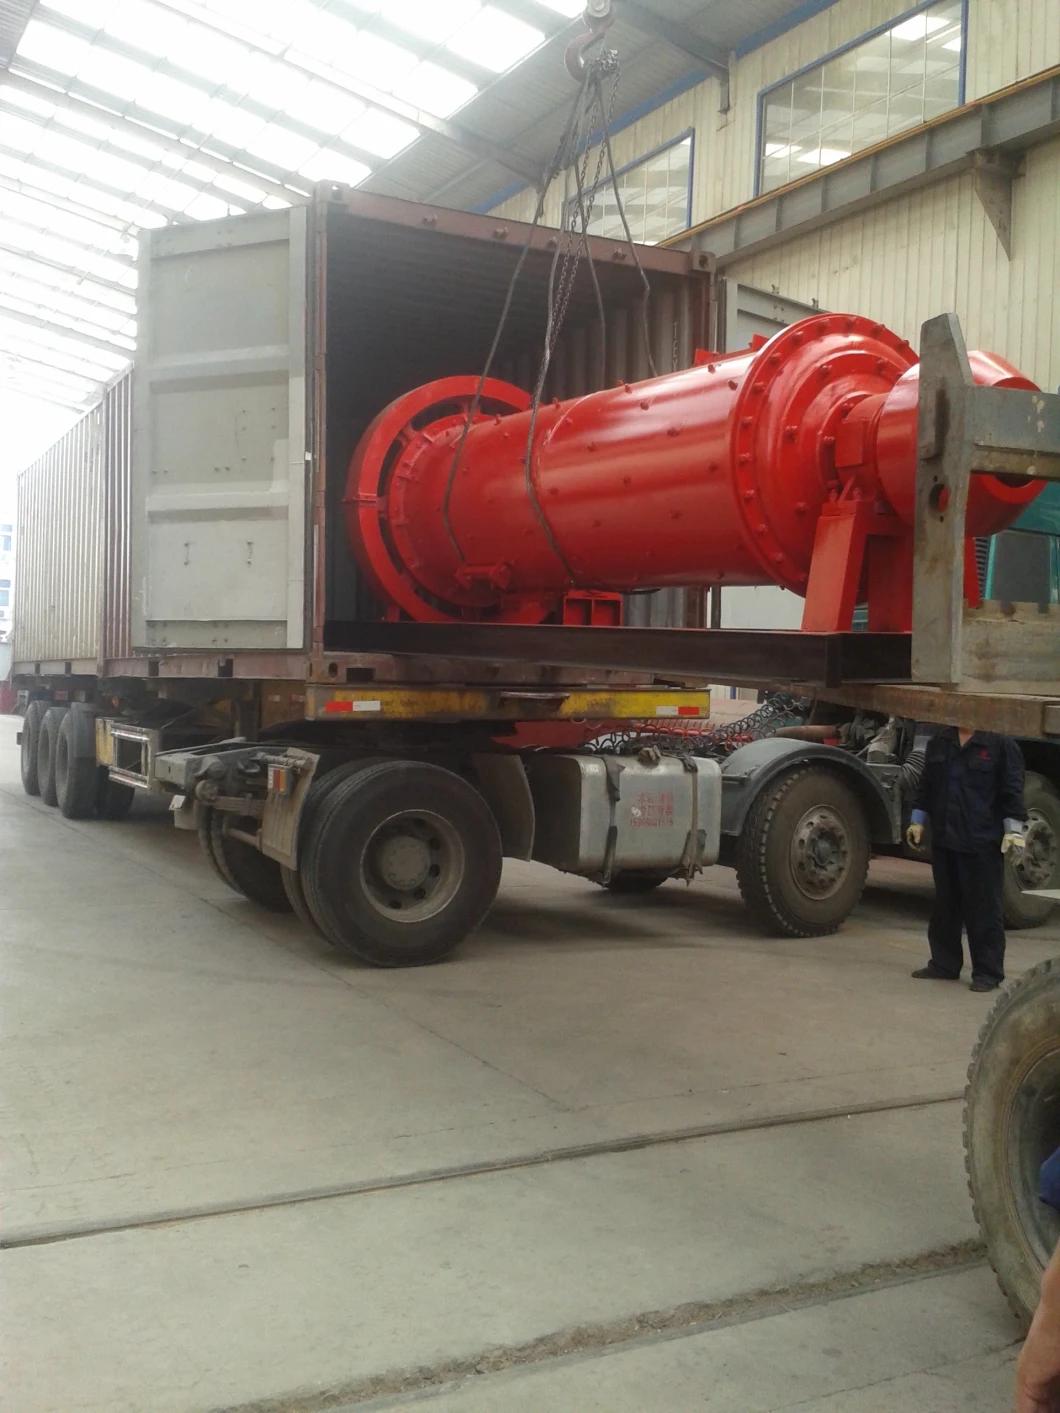 Small Ball Mill/Stone Grinding Mill for Sale